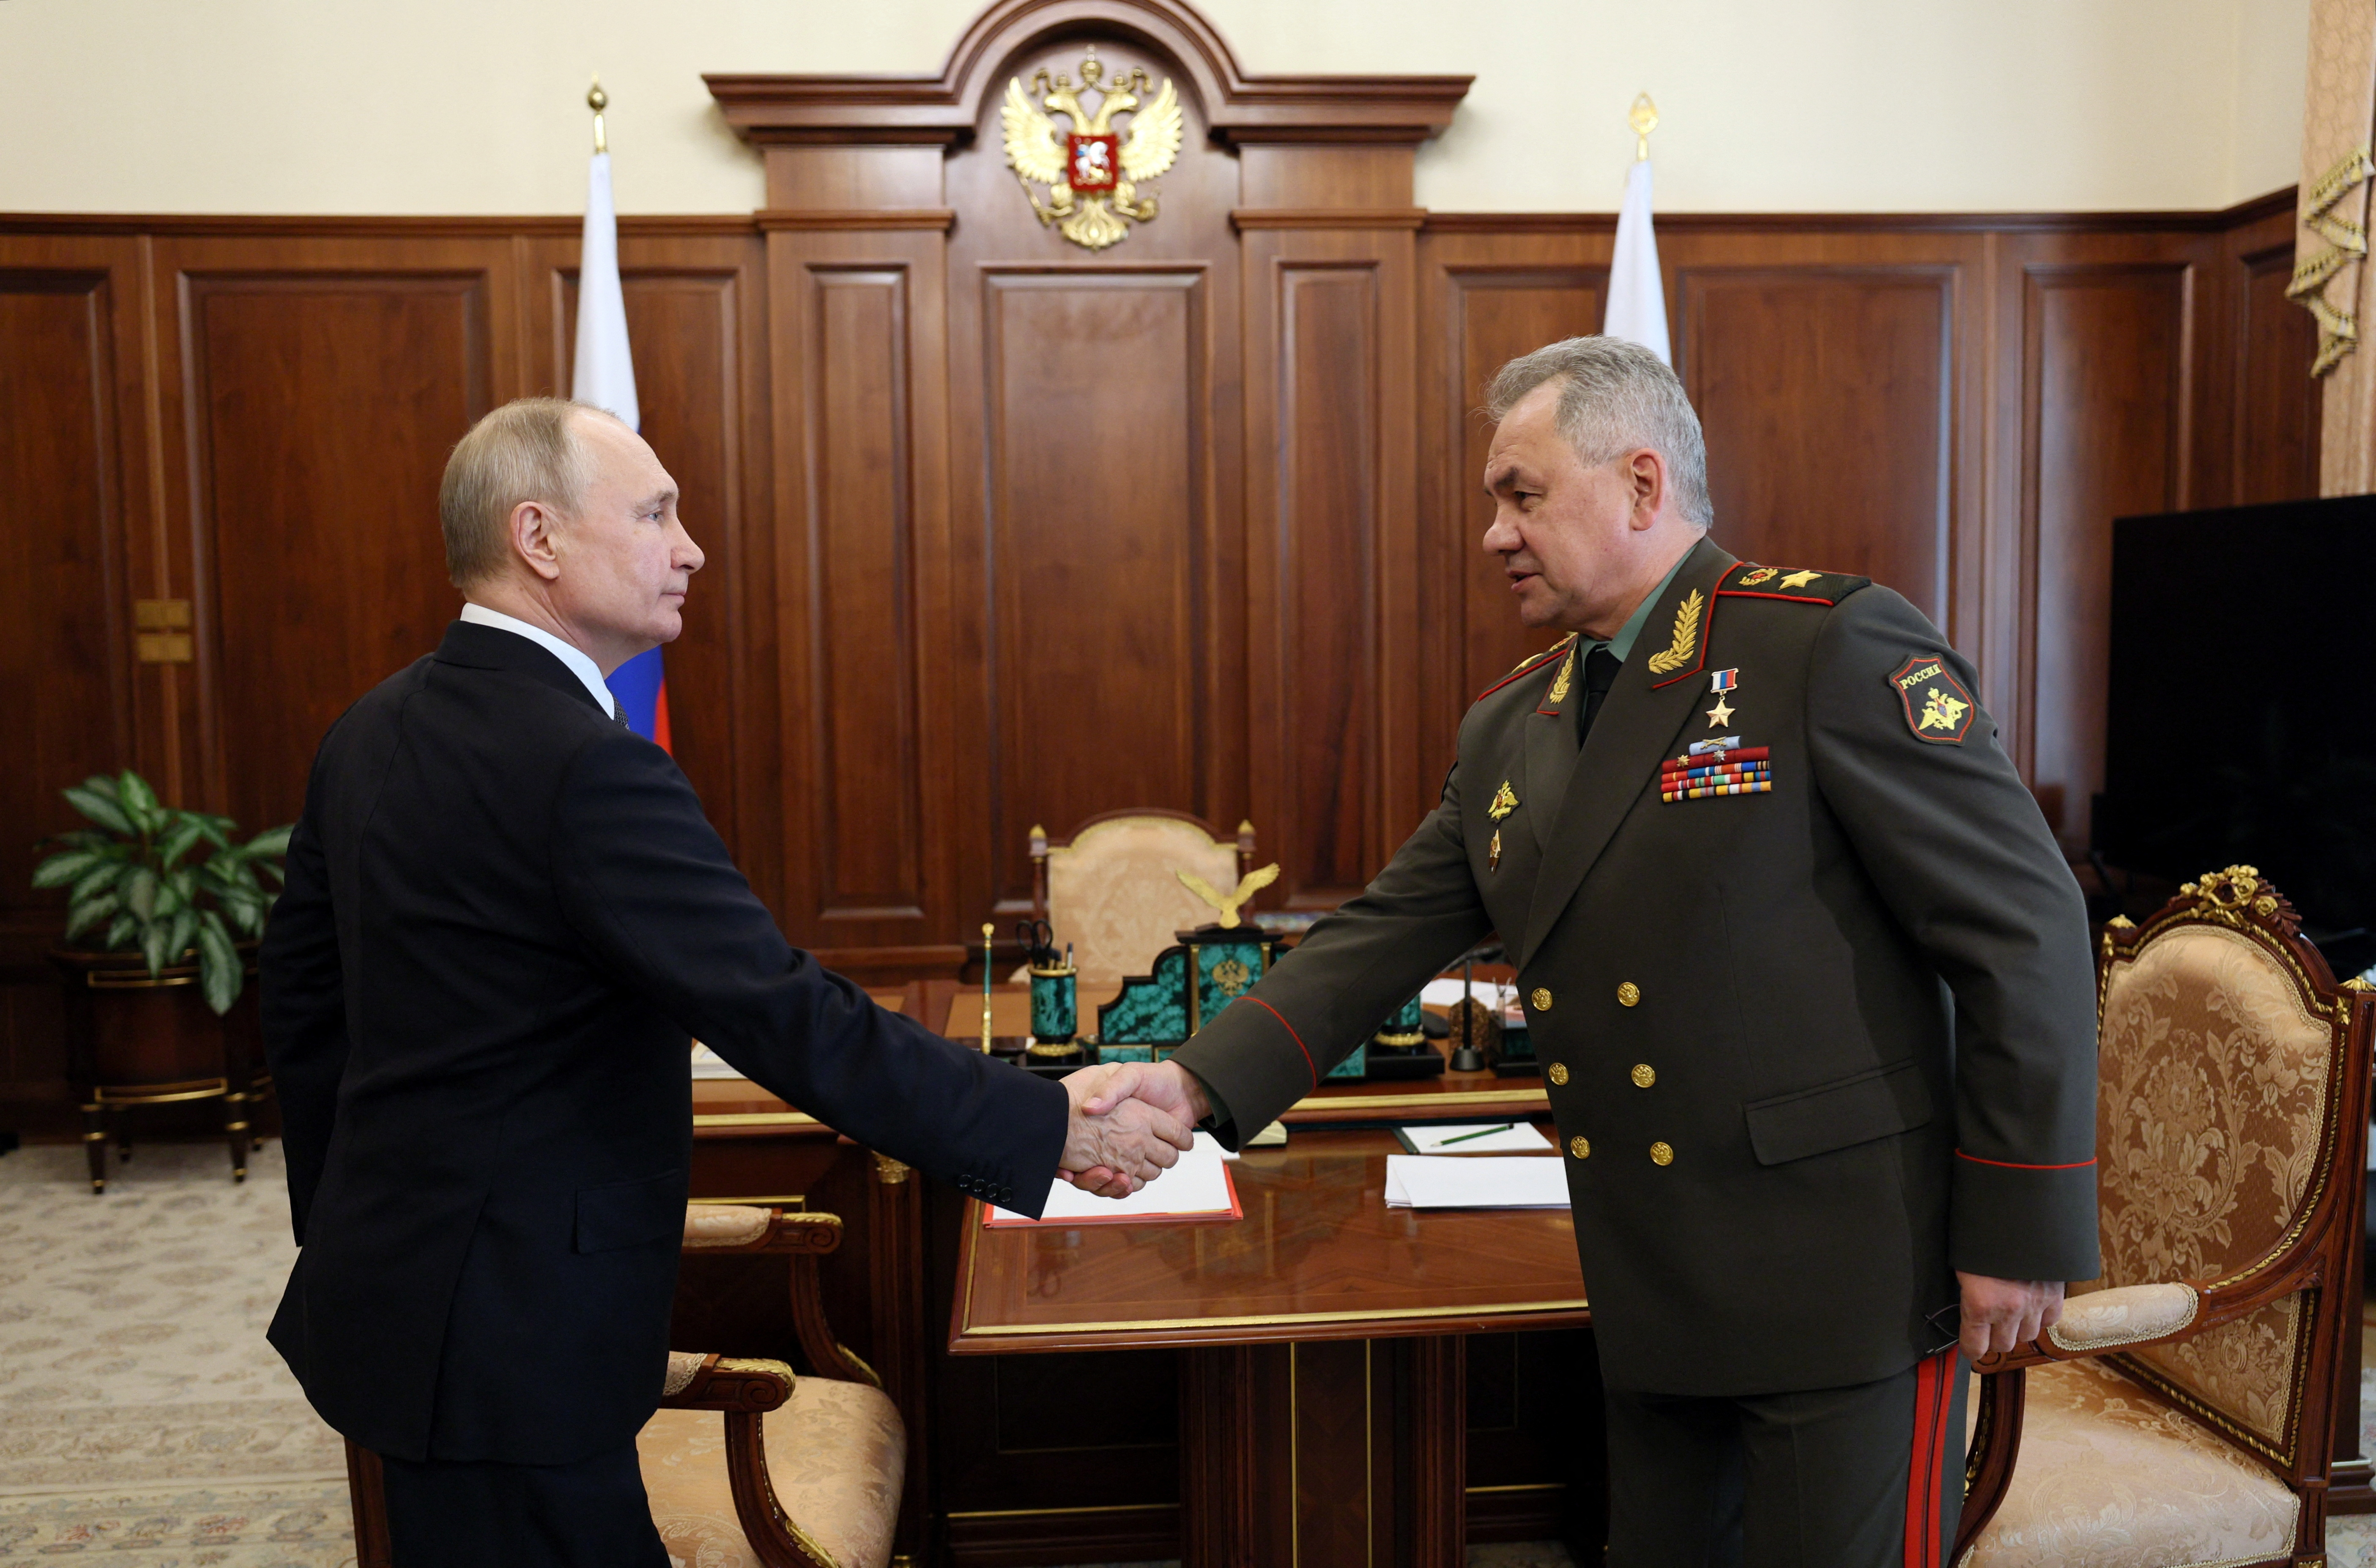 Russian President Putin meets Defence Minister Shoigu in Moscow